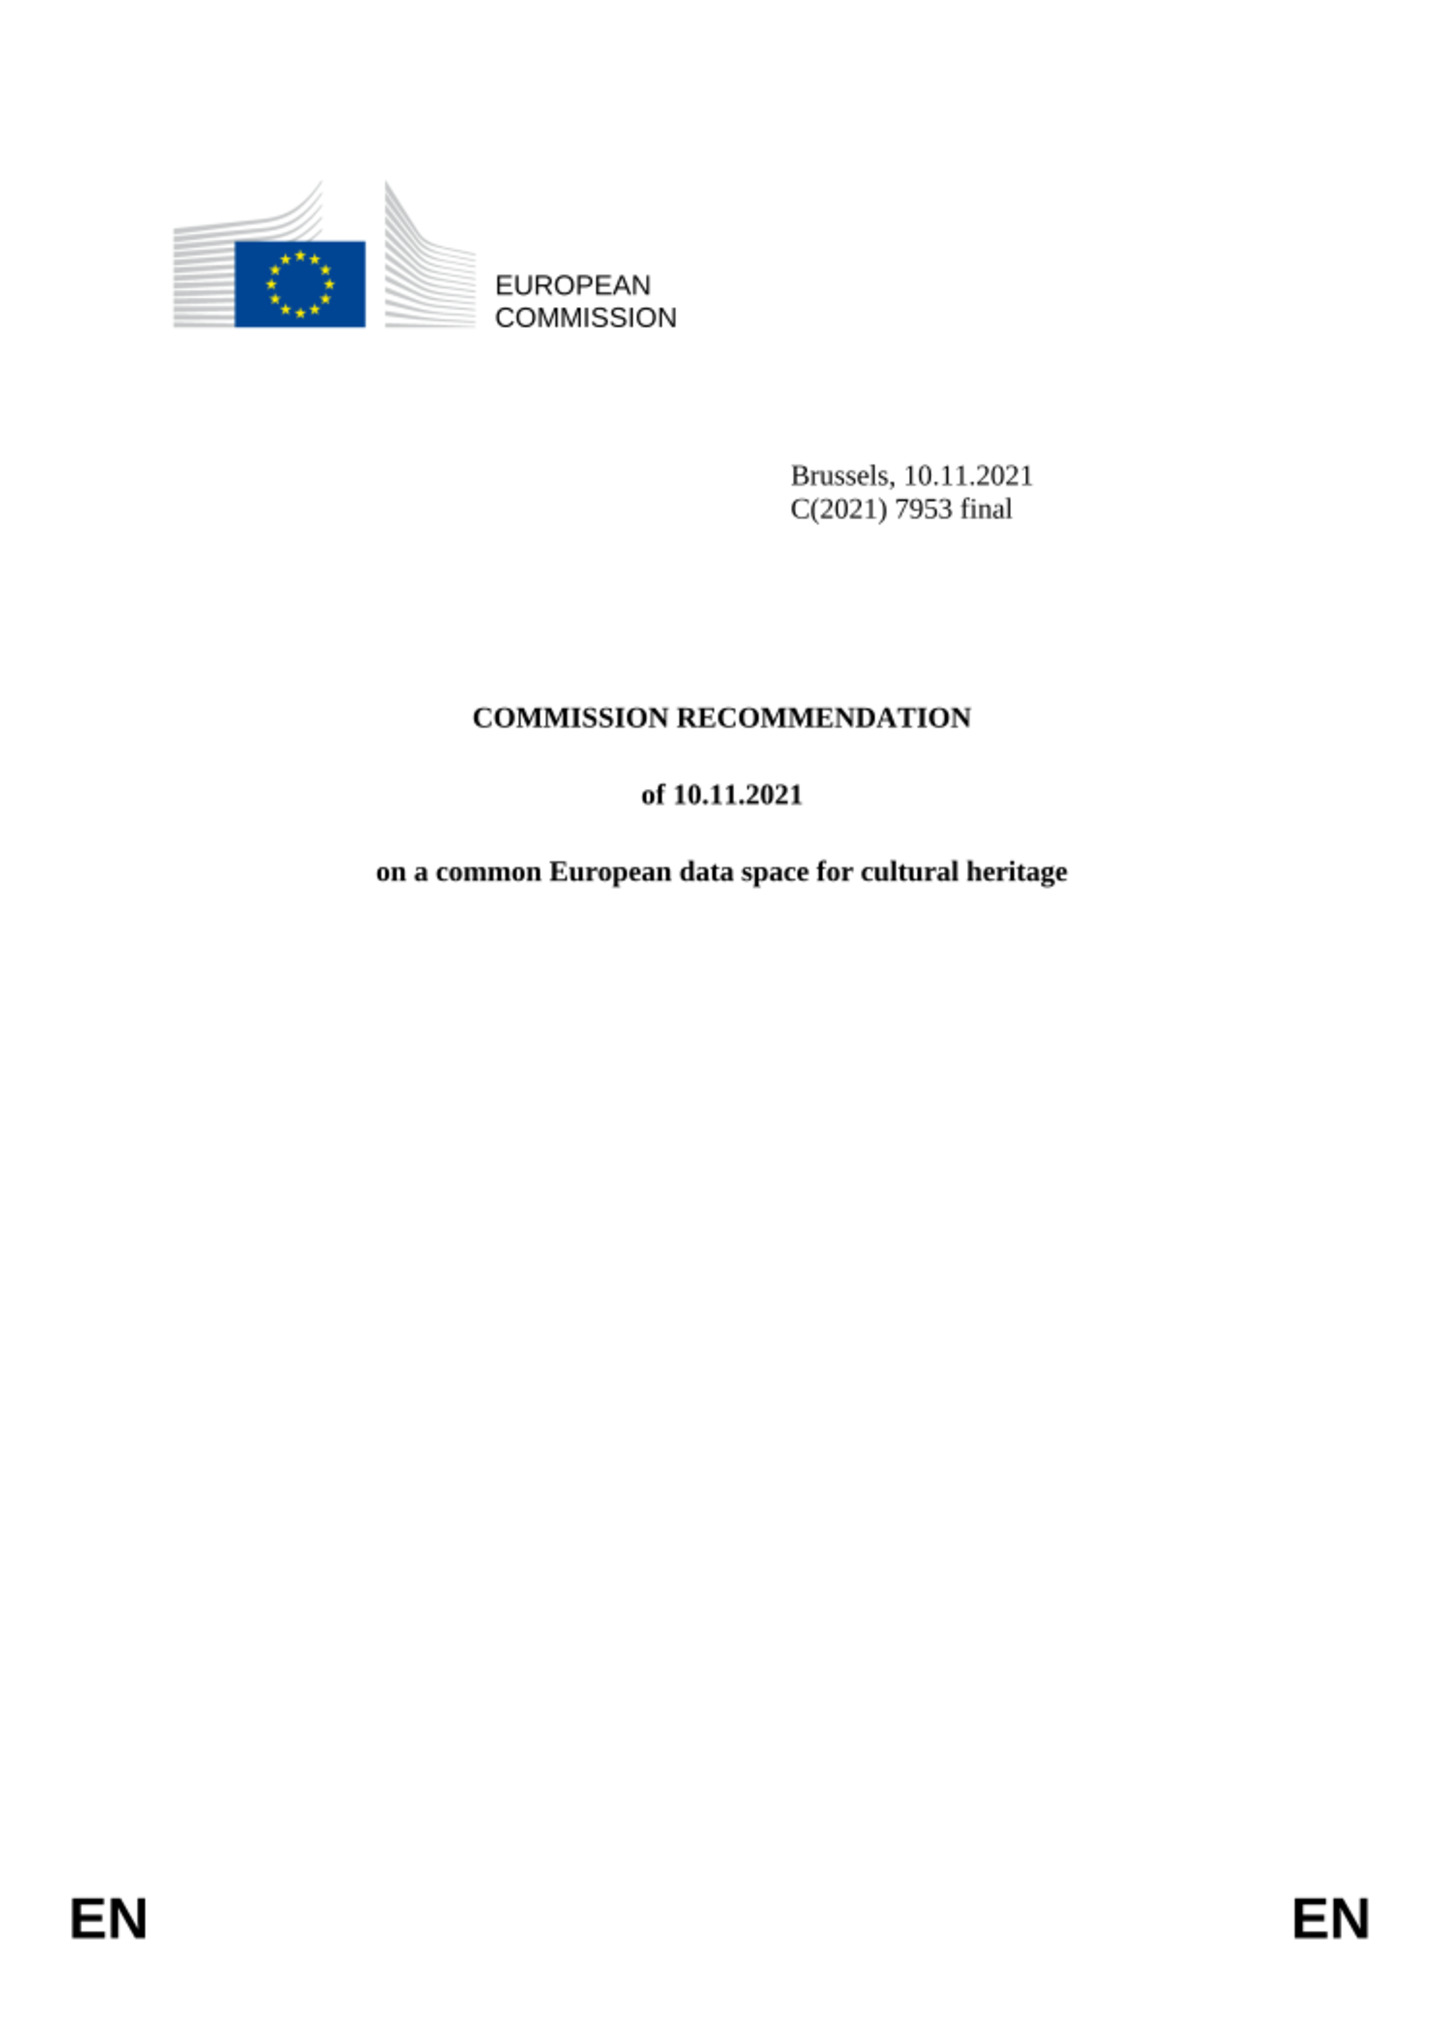 Commission recommendation on a common European data space for cultural heritage